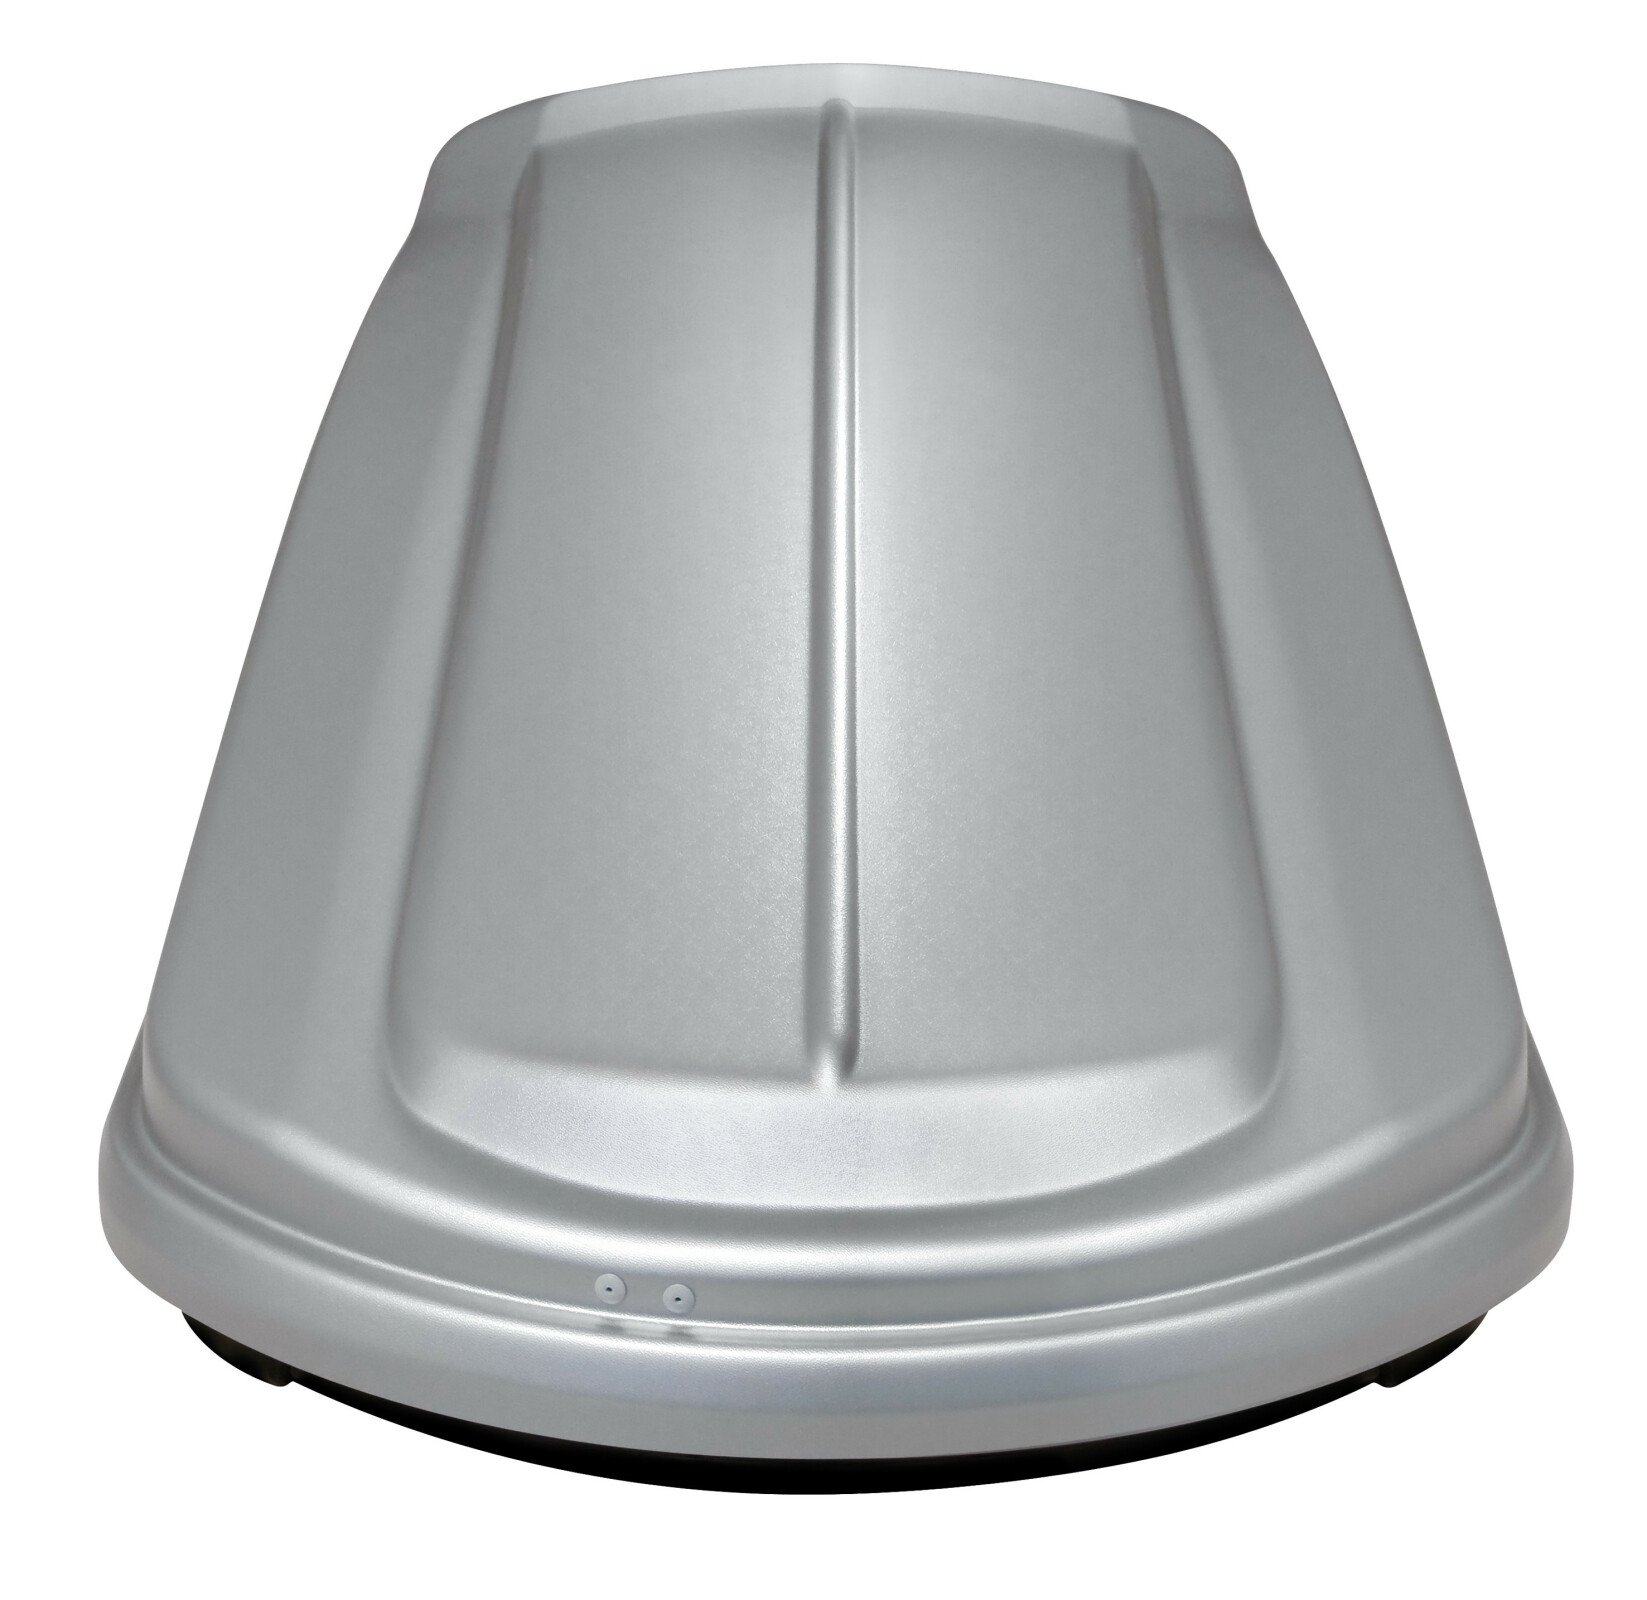 D-Box 430, ABS roof box, 430 ltrs - Embossed Grey thumb